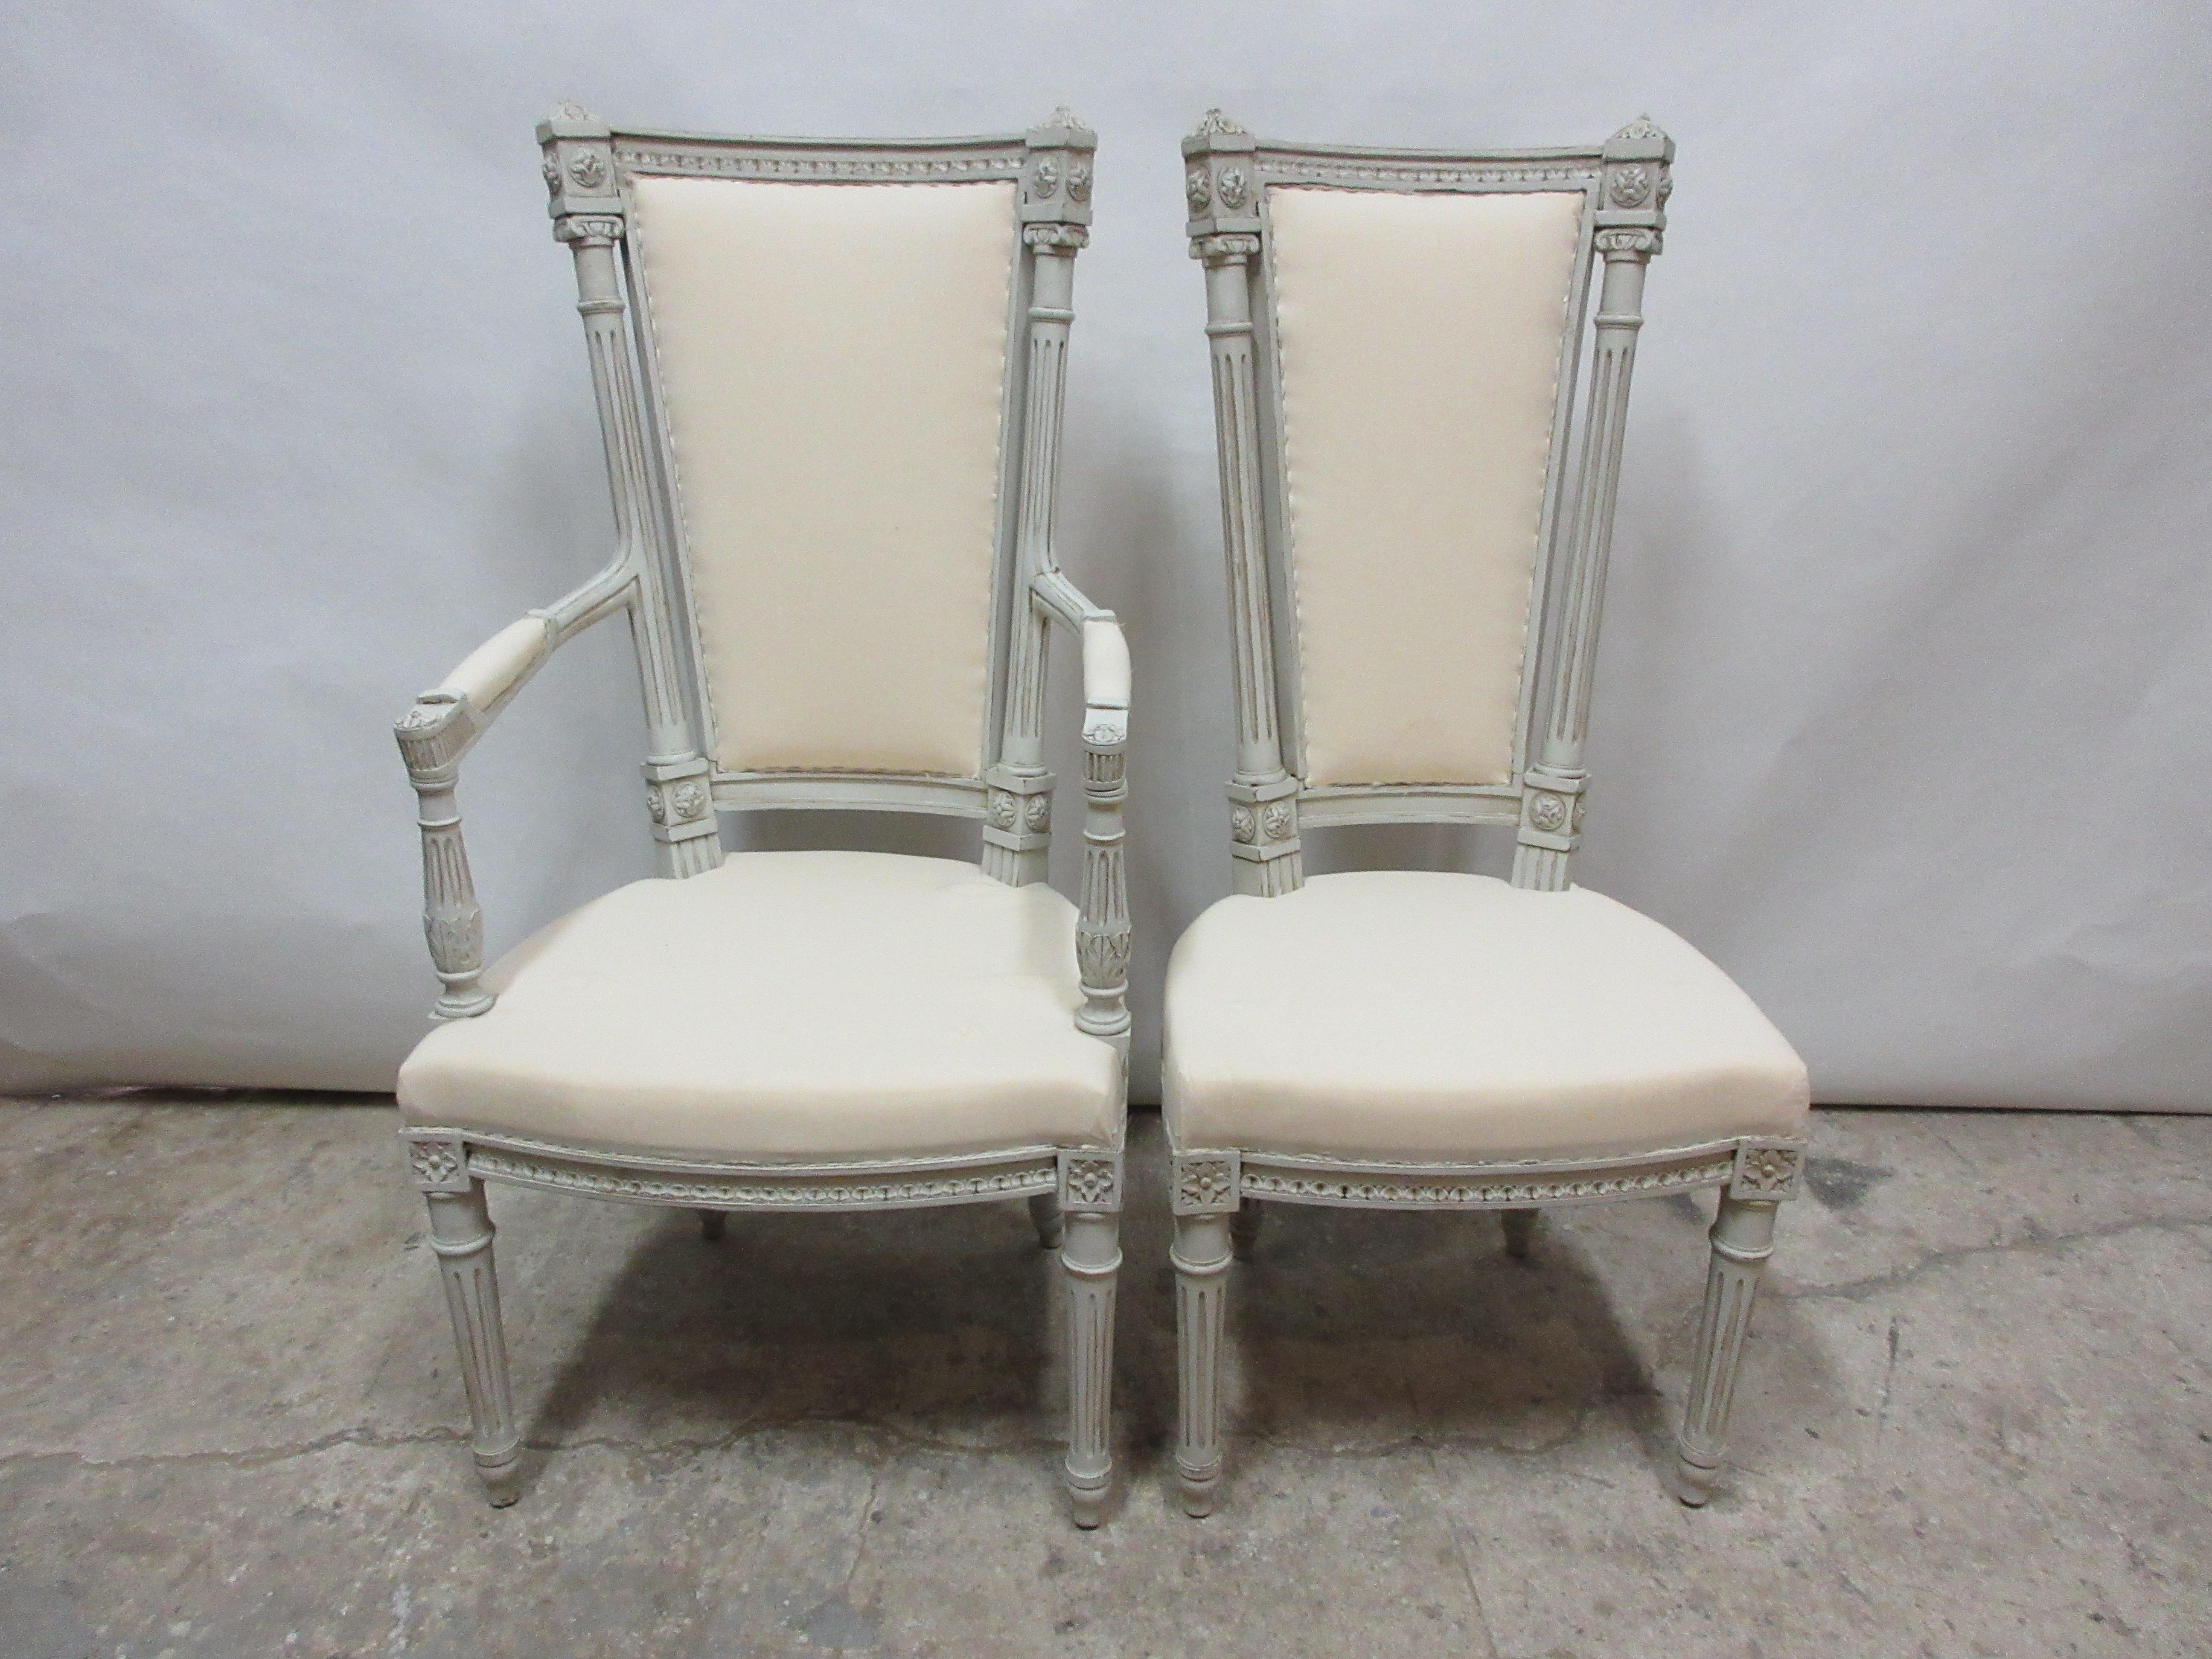 This is a set of 6 Swedish Gustavian dining chairs. They have been restored and repainted with milk paints 